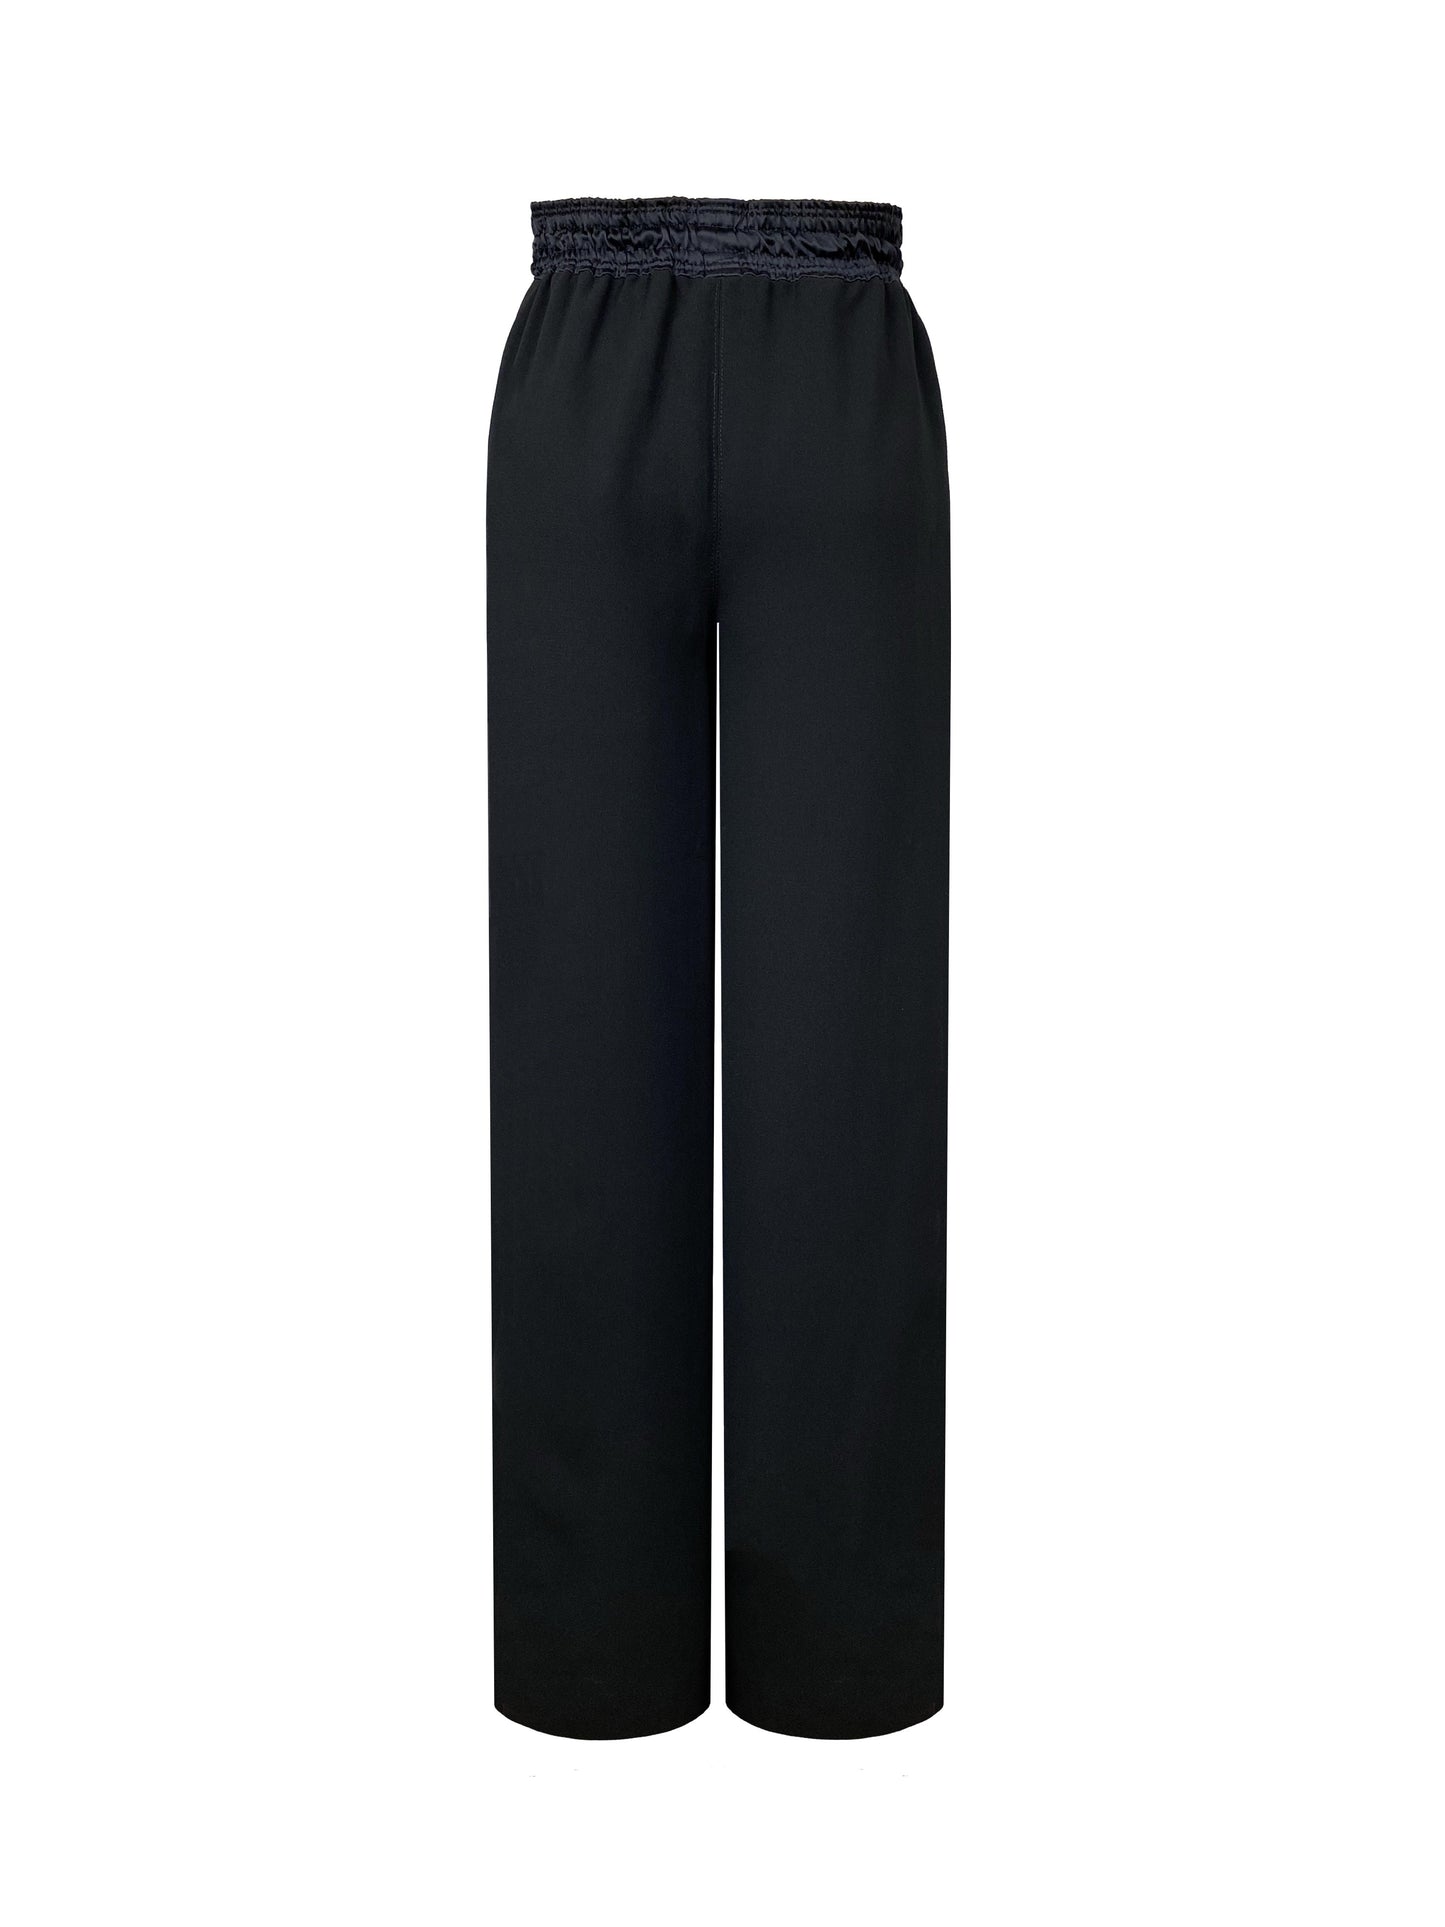 THE SUIT PANT IN CREPE